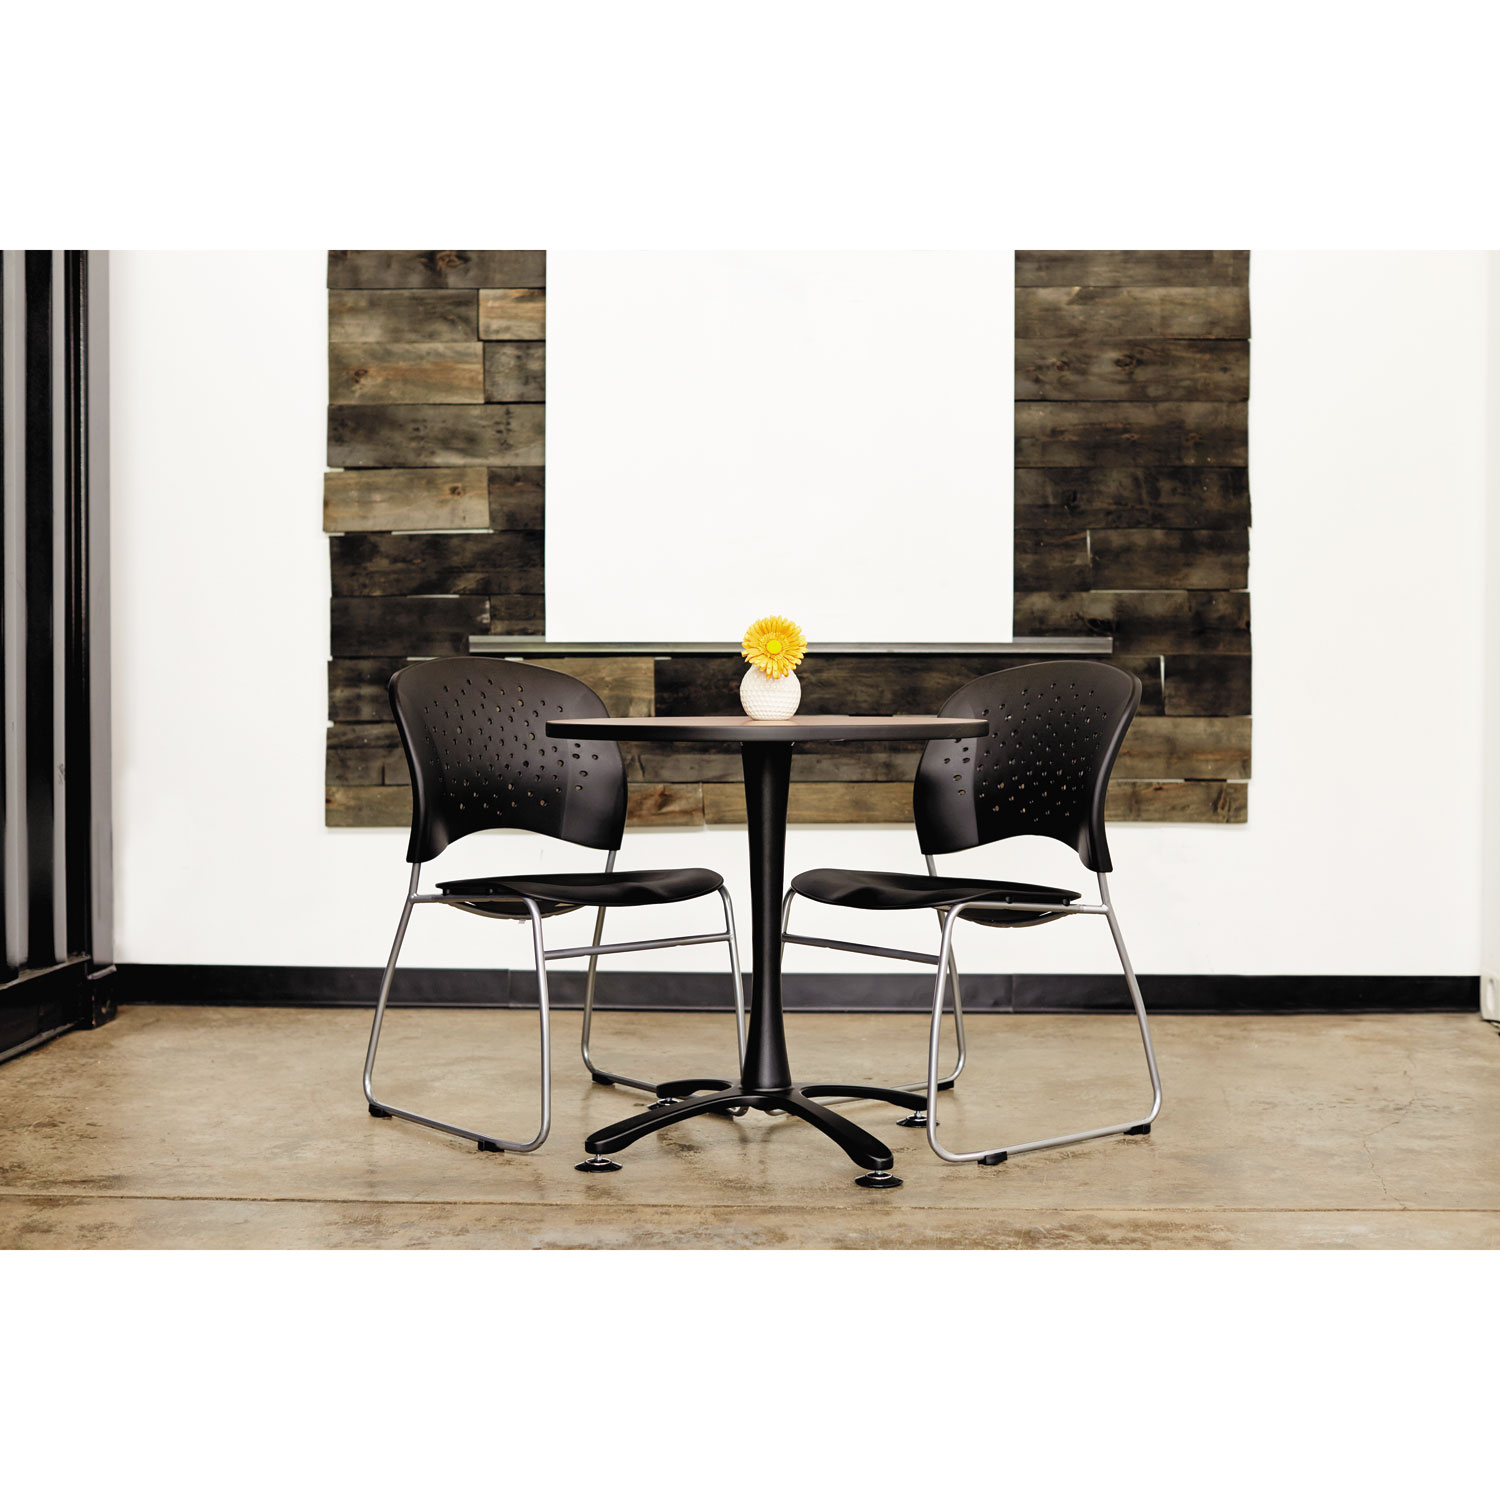 Rêve Series Guest Chair With Sled Base, Black Plastic, Silver Steel, 2/Carton